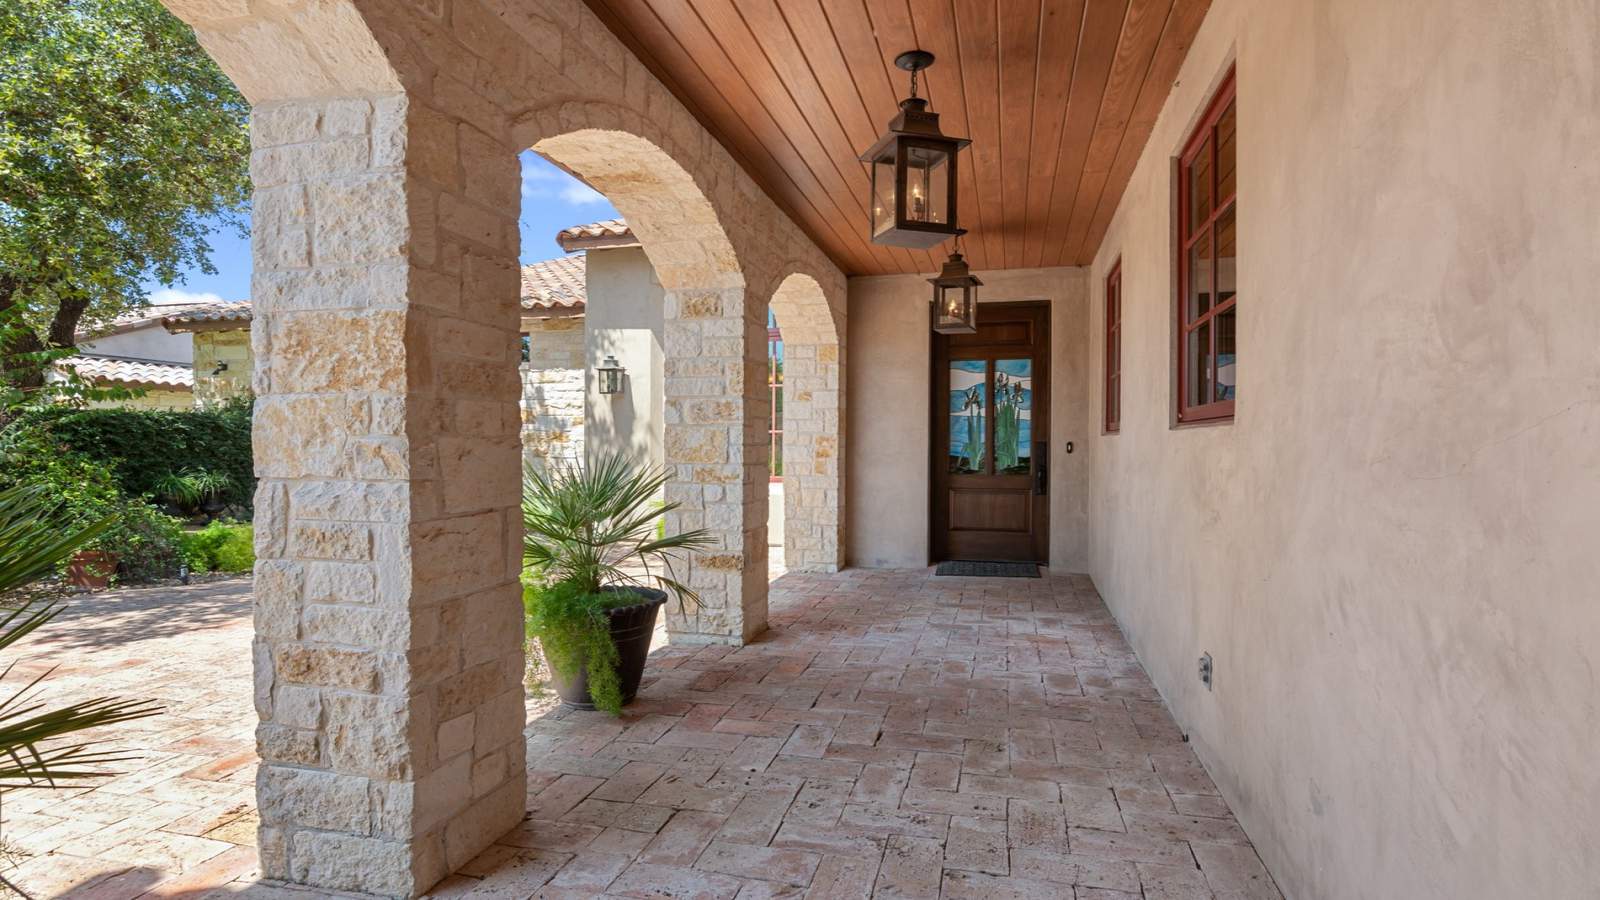 Video shows inside of $1.18 million Tuscan style home in Cordillera Ranch